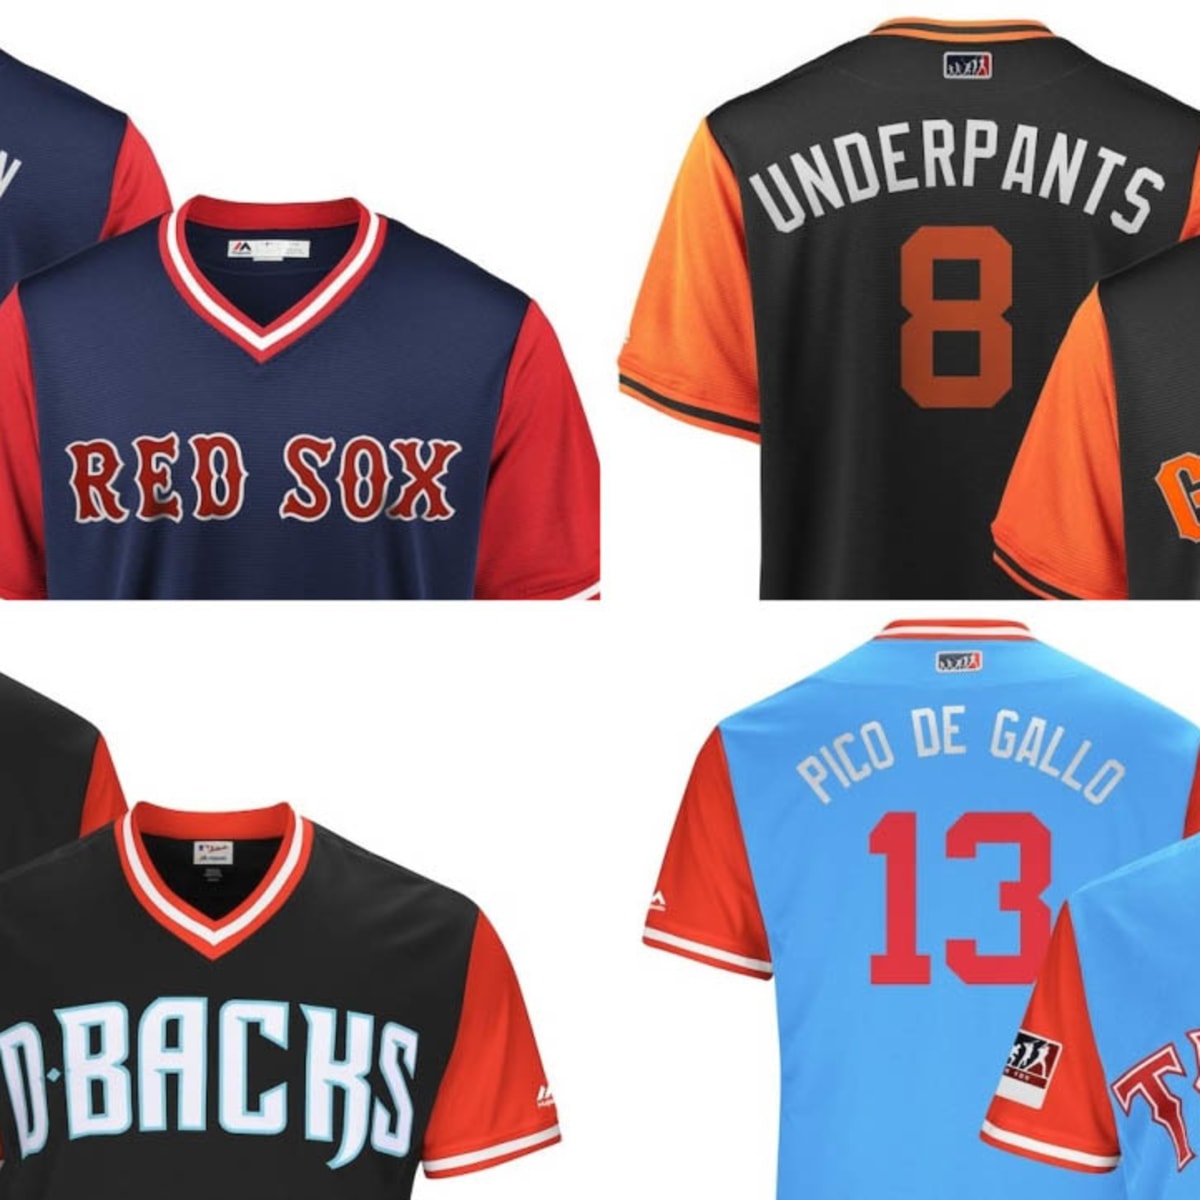 padres players weekend jerseys